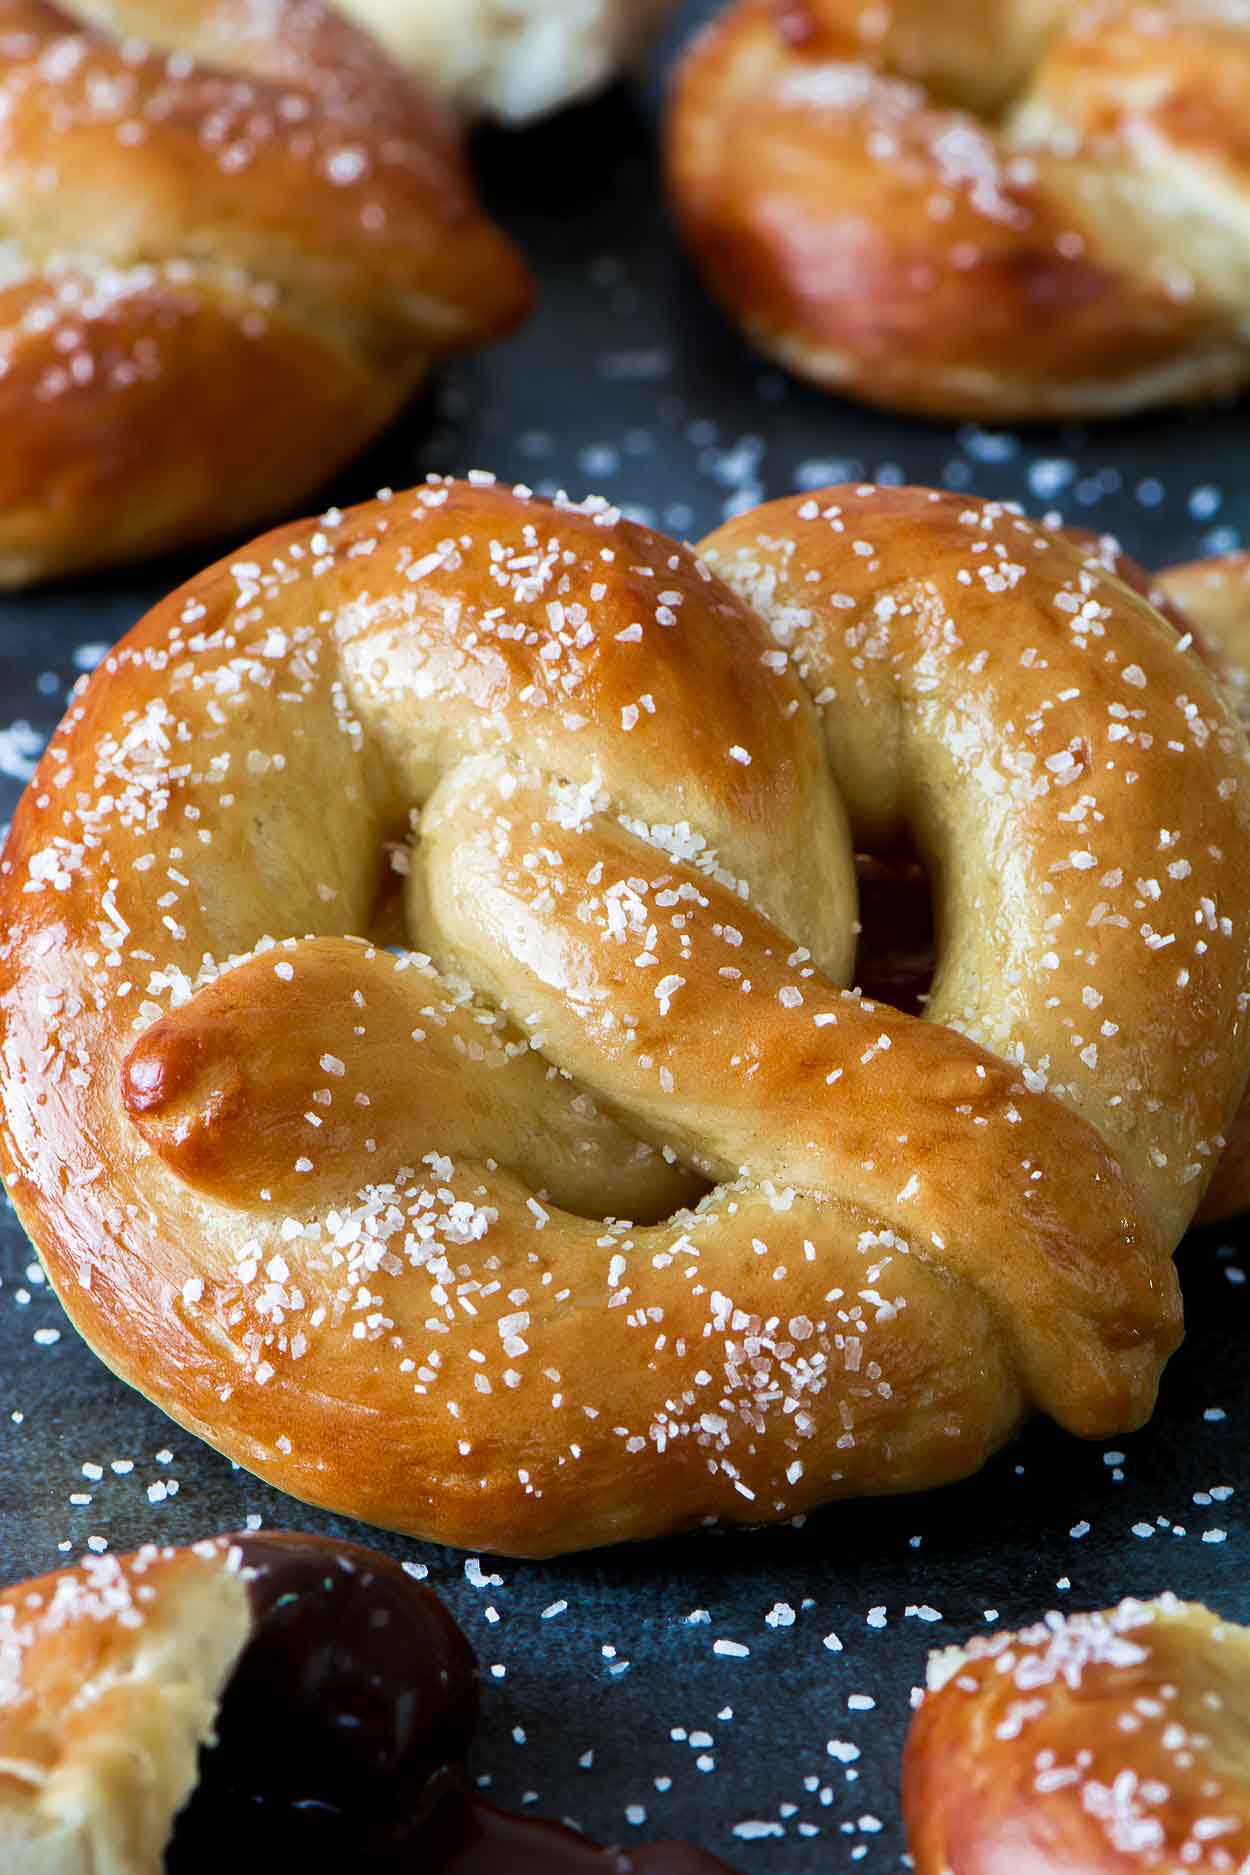 Photo of a classic large soft pretzel sprinkled with salt.